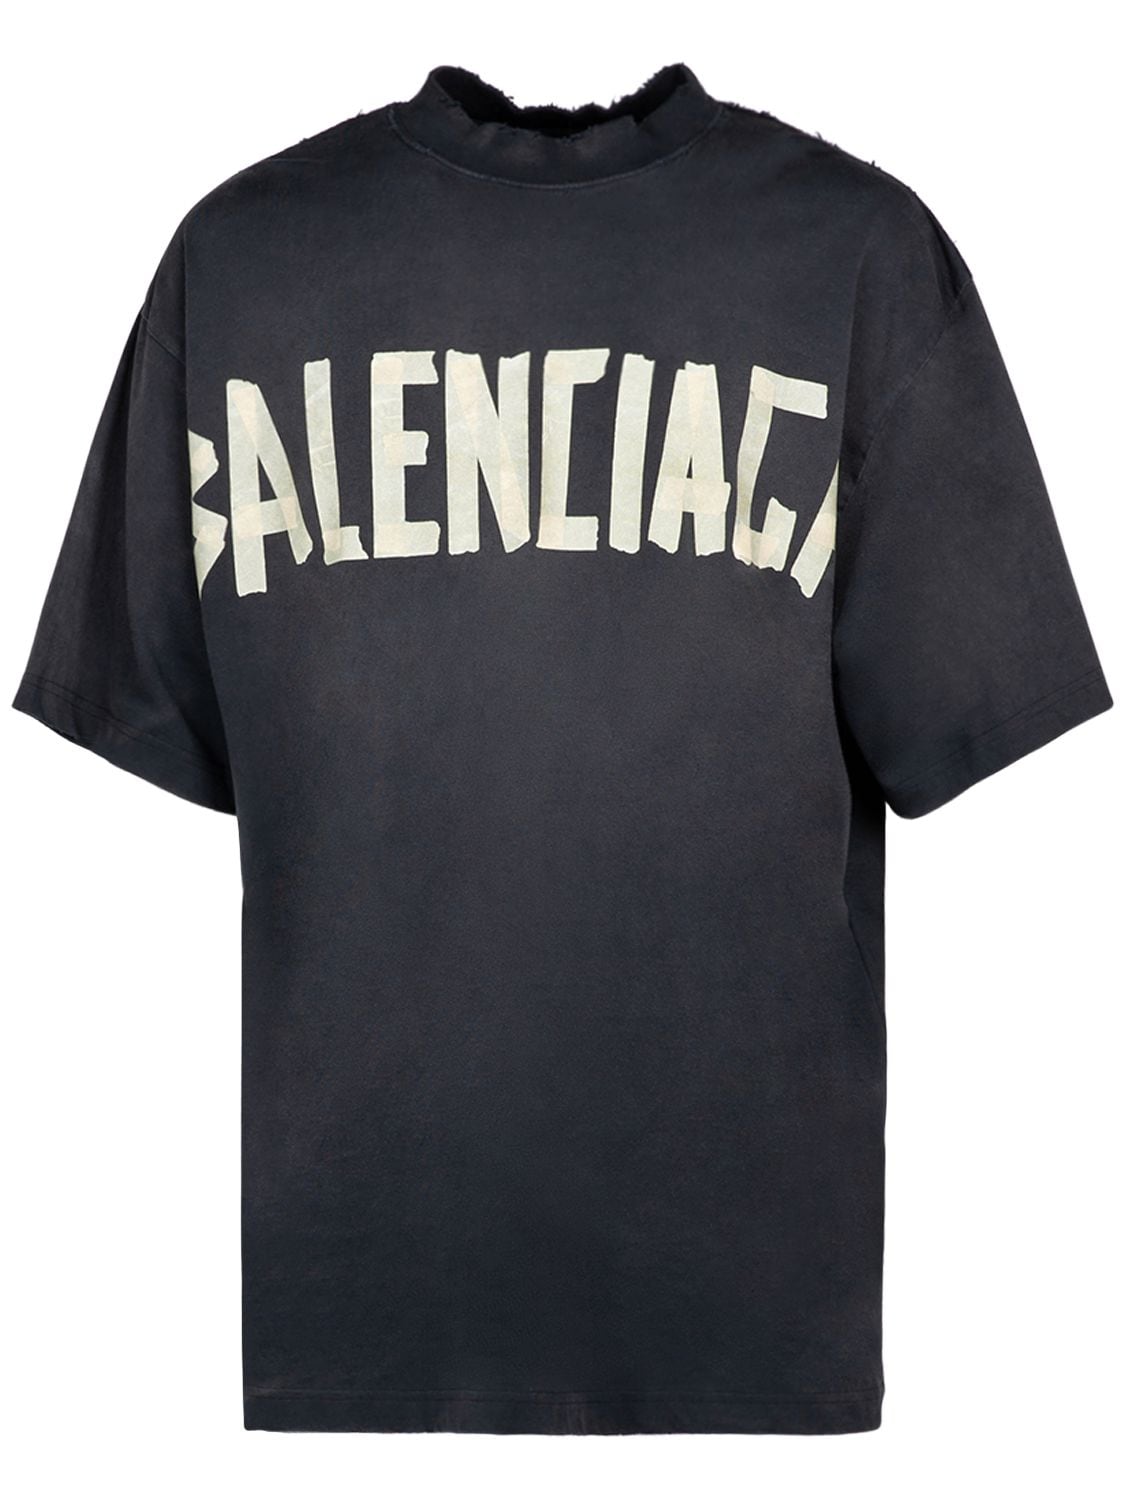 Balenciaga Tape Type Vintage Effect Cotton T-shirt In Black Faded